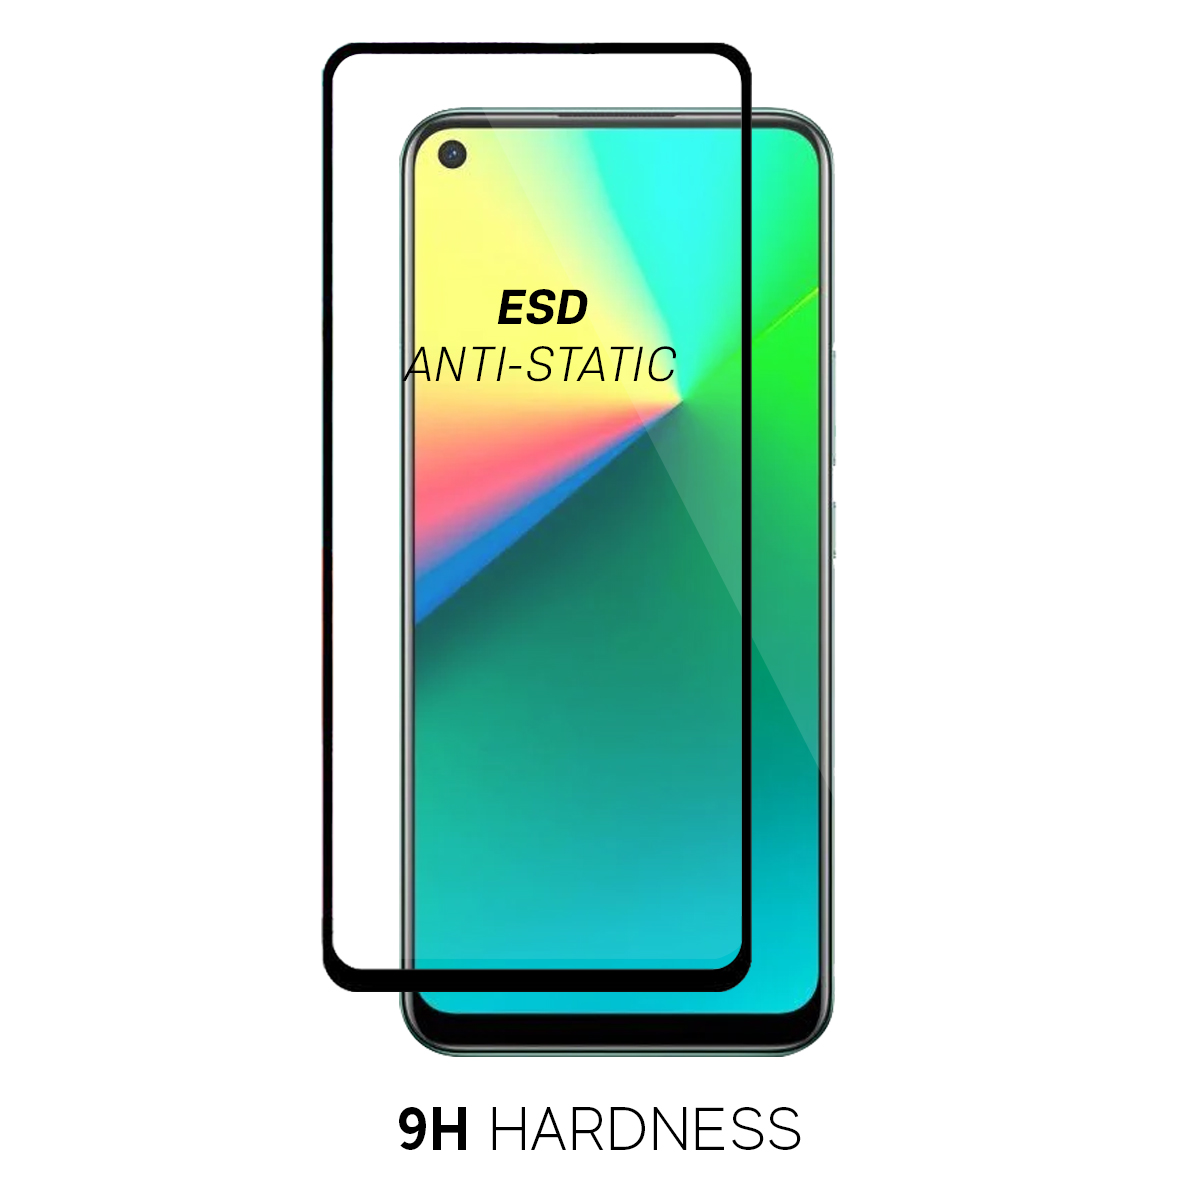 Beyox ESD Anti Static 5D Glass for Realme C2s